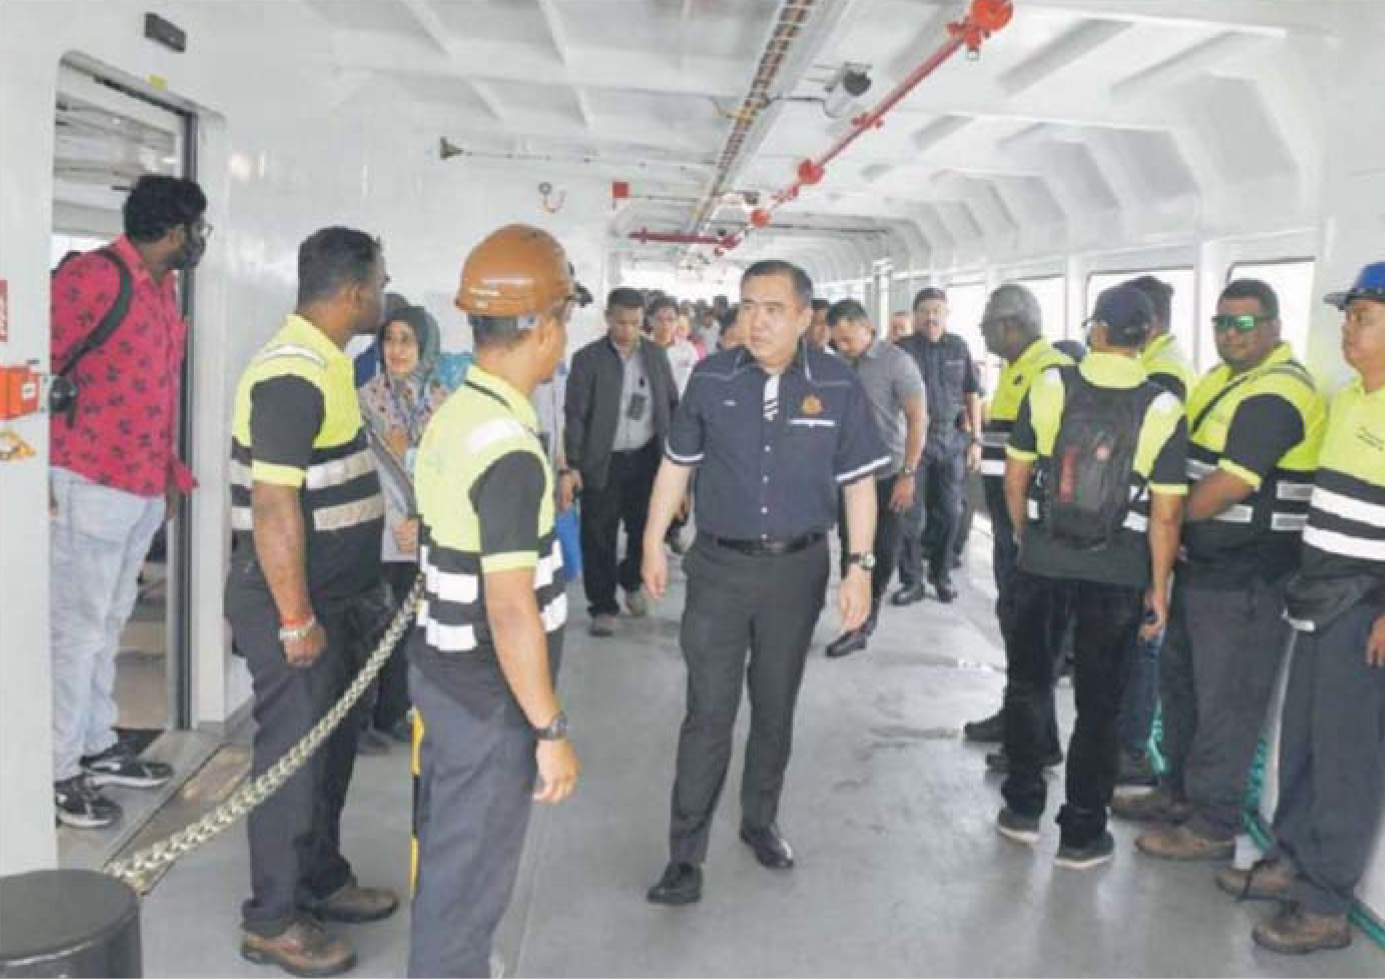 Thumbnail_Sunday Post - New Penang ferry service users to enjoy free rides for one month starting Aug 7